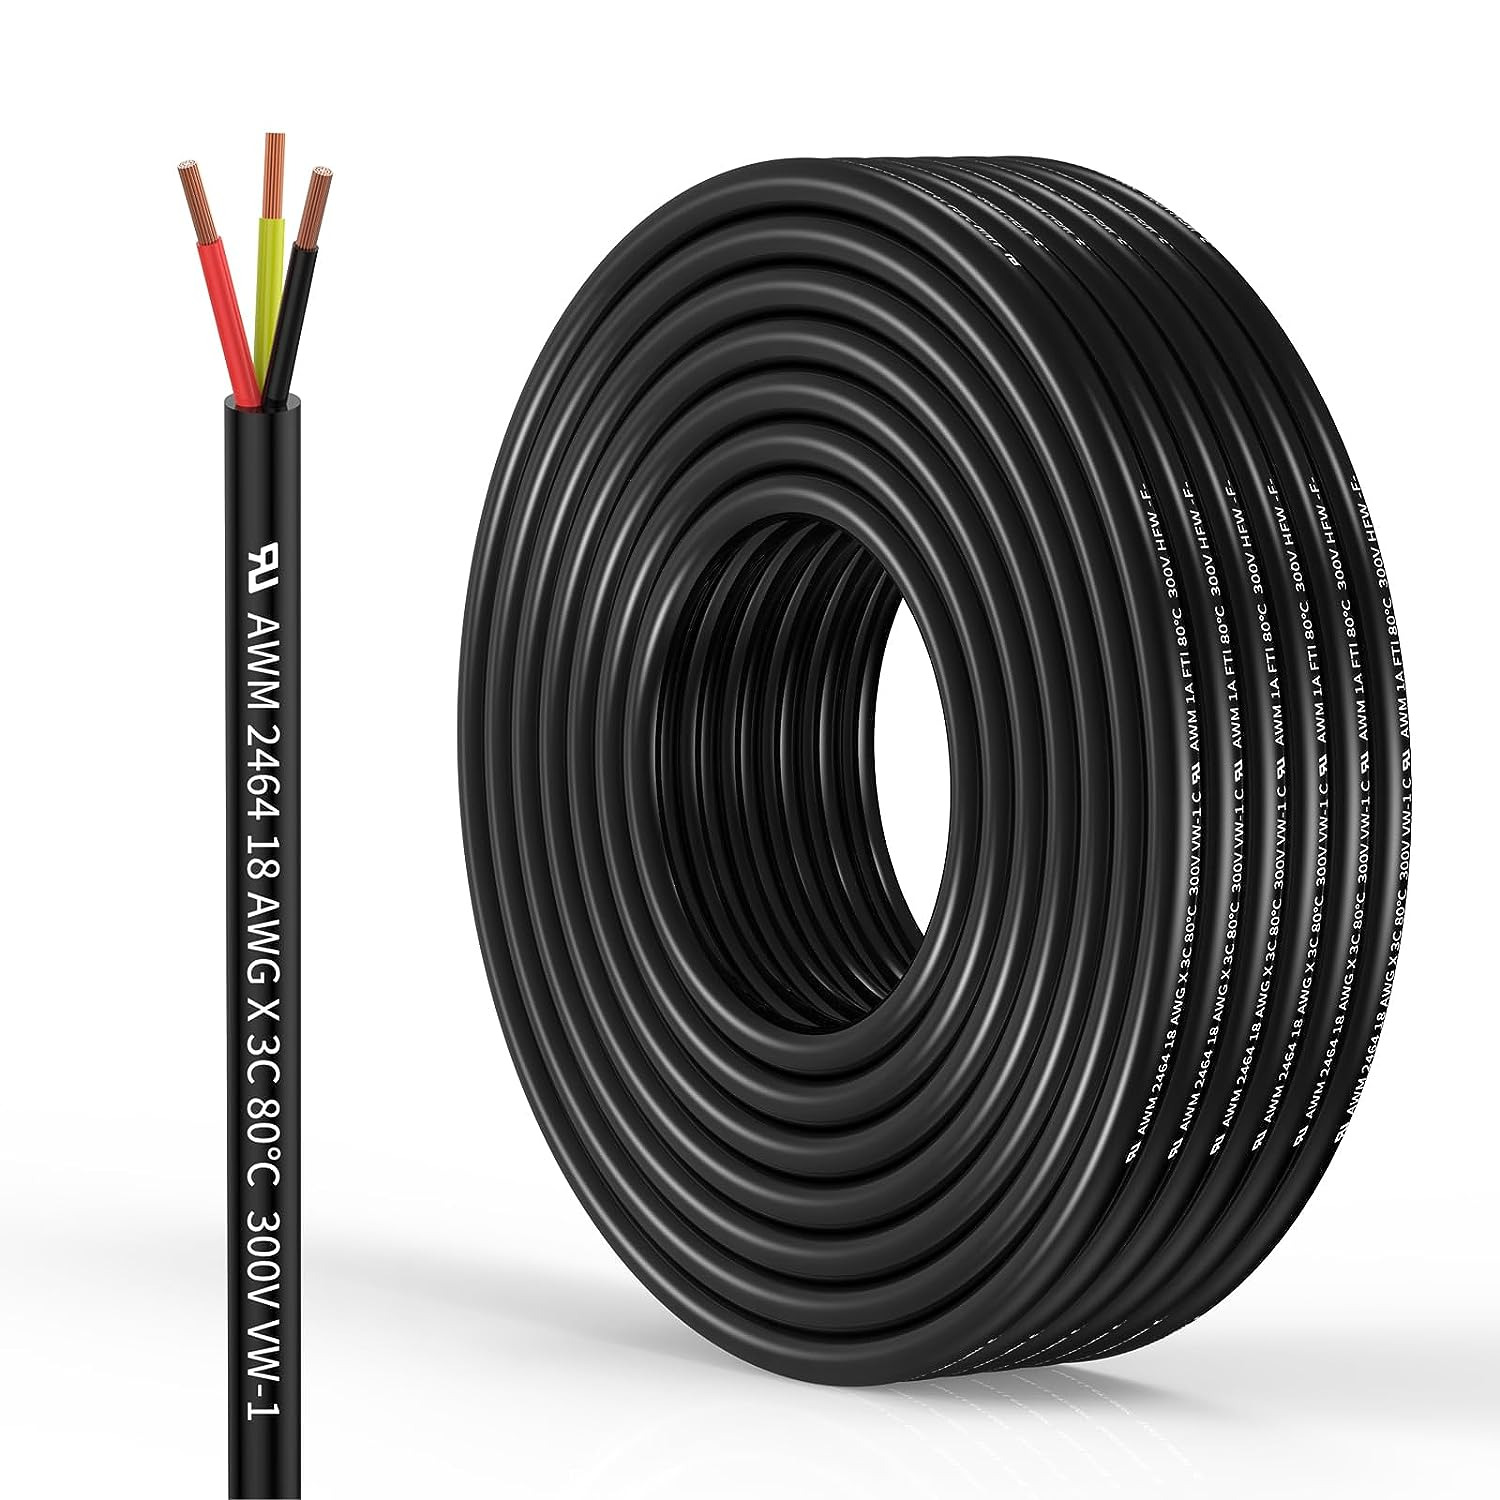 18 Gauge 3 Conductor Electrical Wire Oxygen-Free Copper Cable 25FT/7.7M Flexible